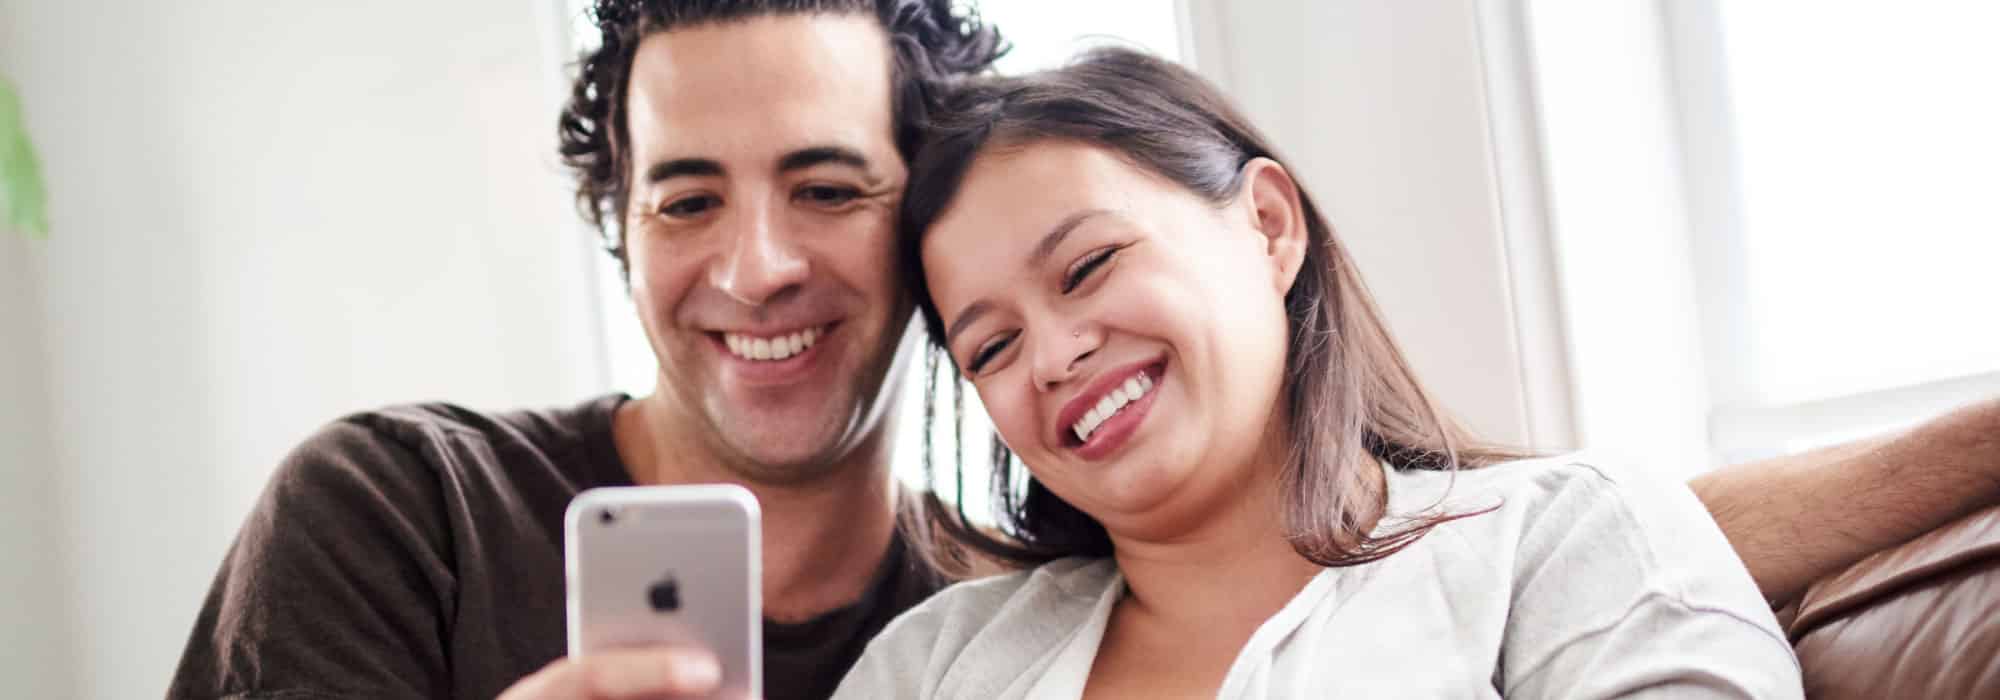 A couple sits on a couch and looks at the screen of a cell phone together. They are laughing.